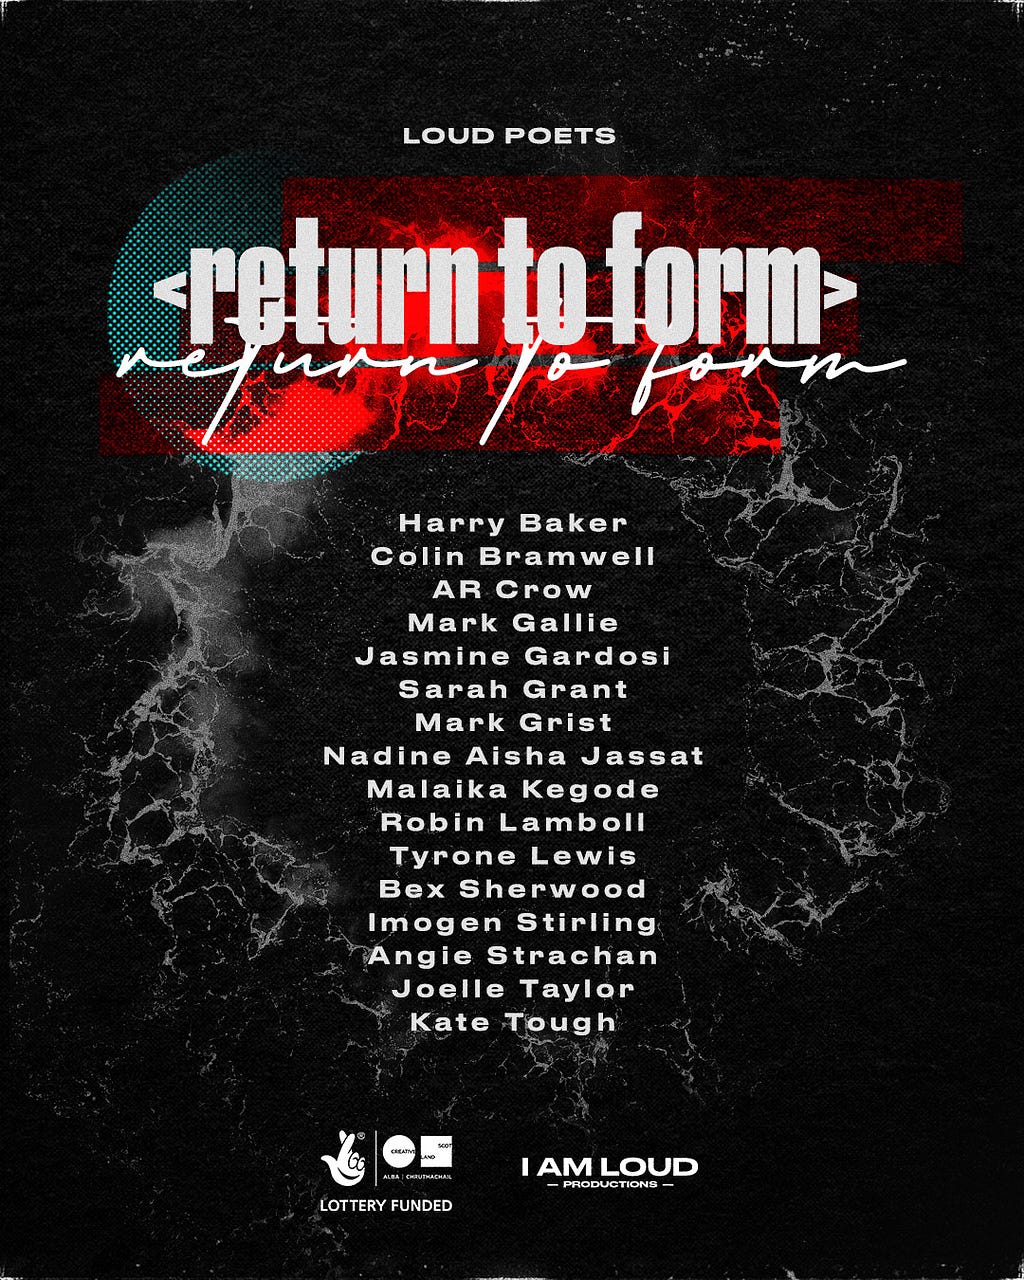 Poster image promoting Loud Poets series Return To Form